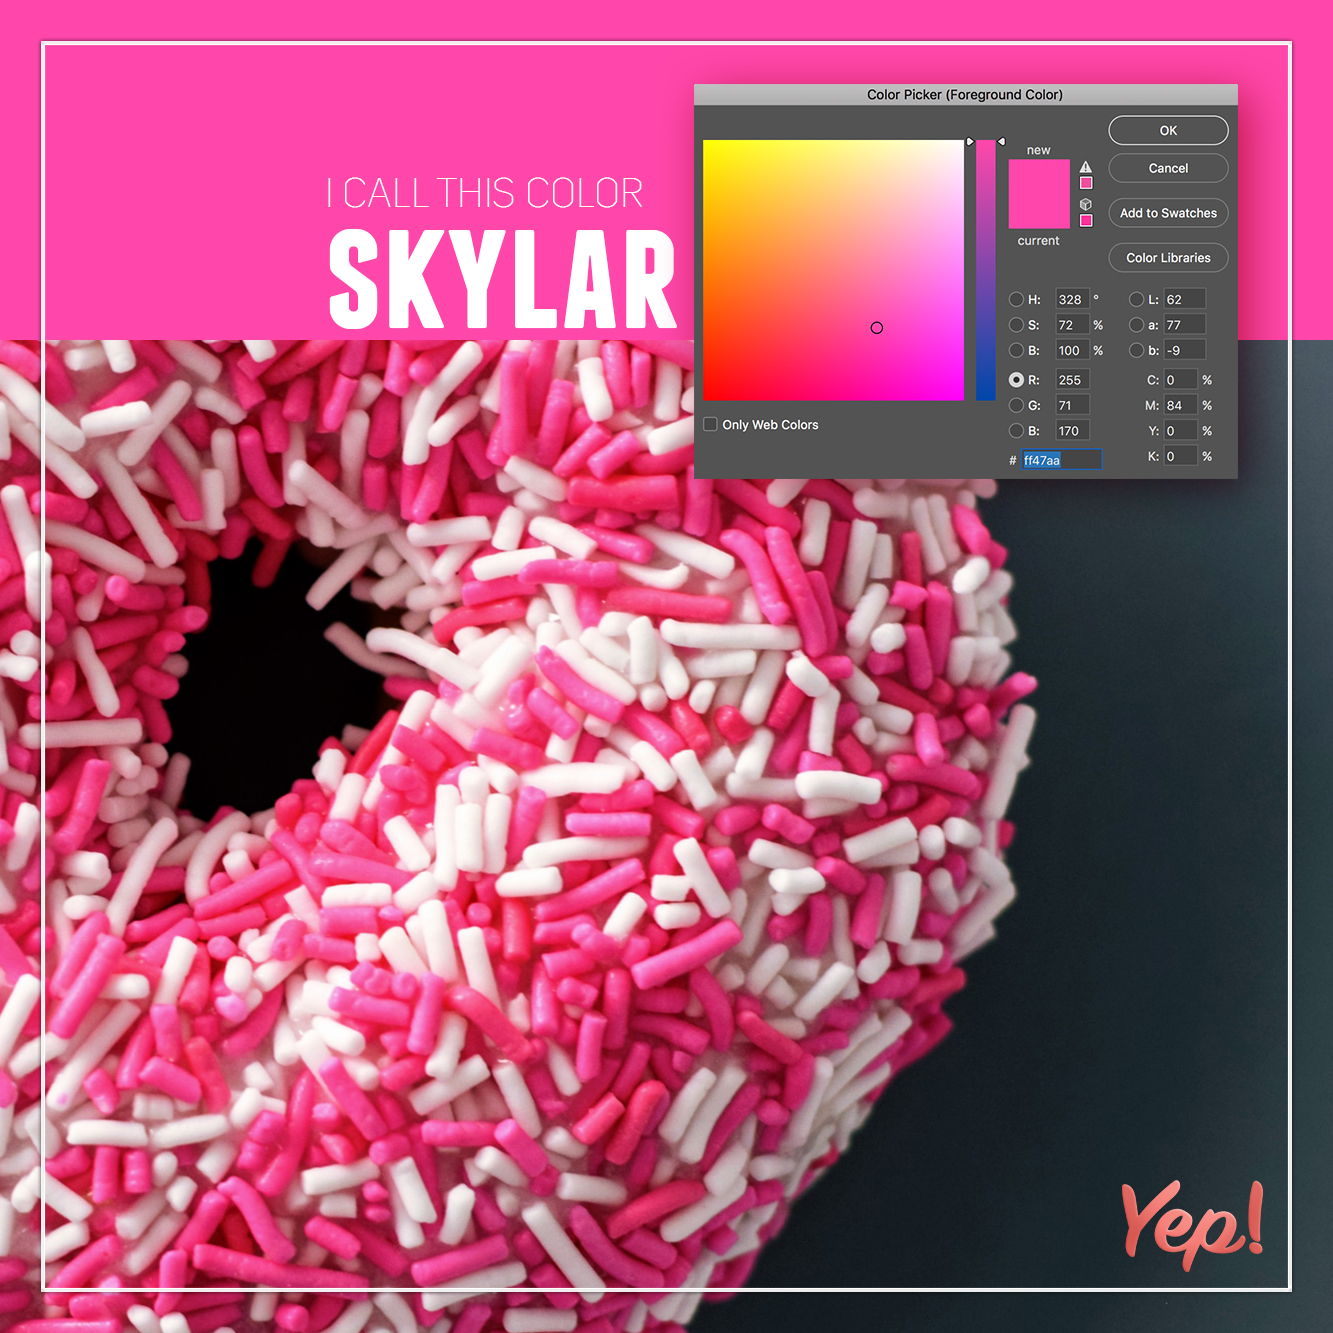 Tcall This Color Skylar One Colors Yep!